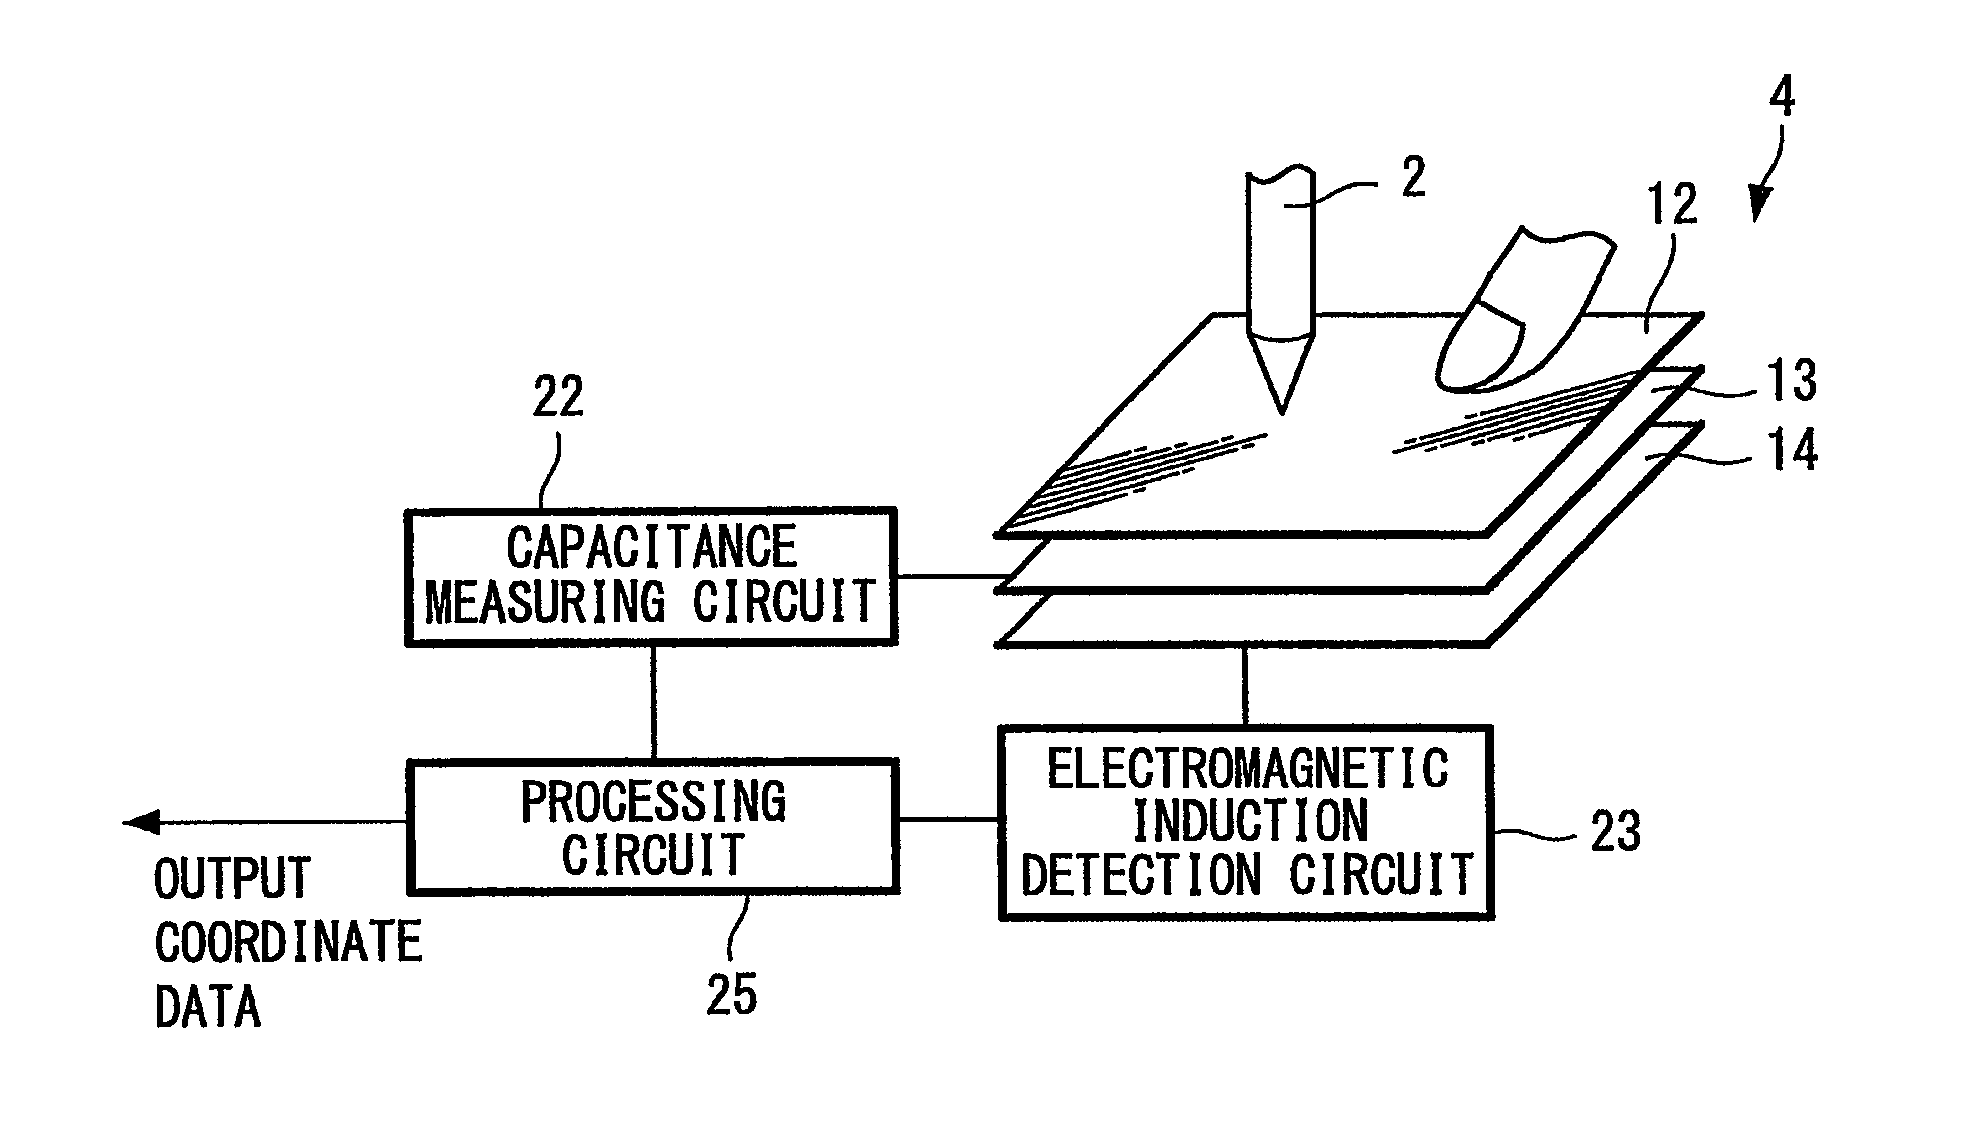 Position detecting device